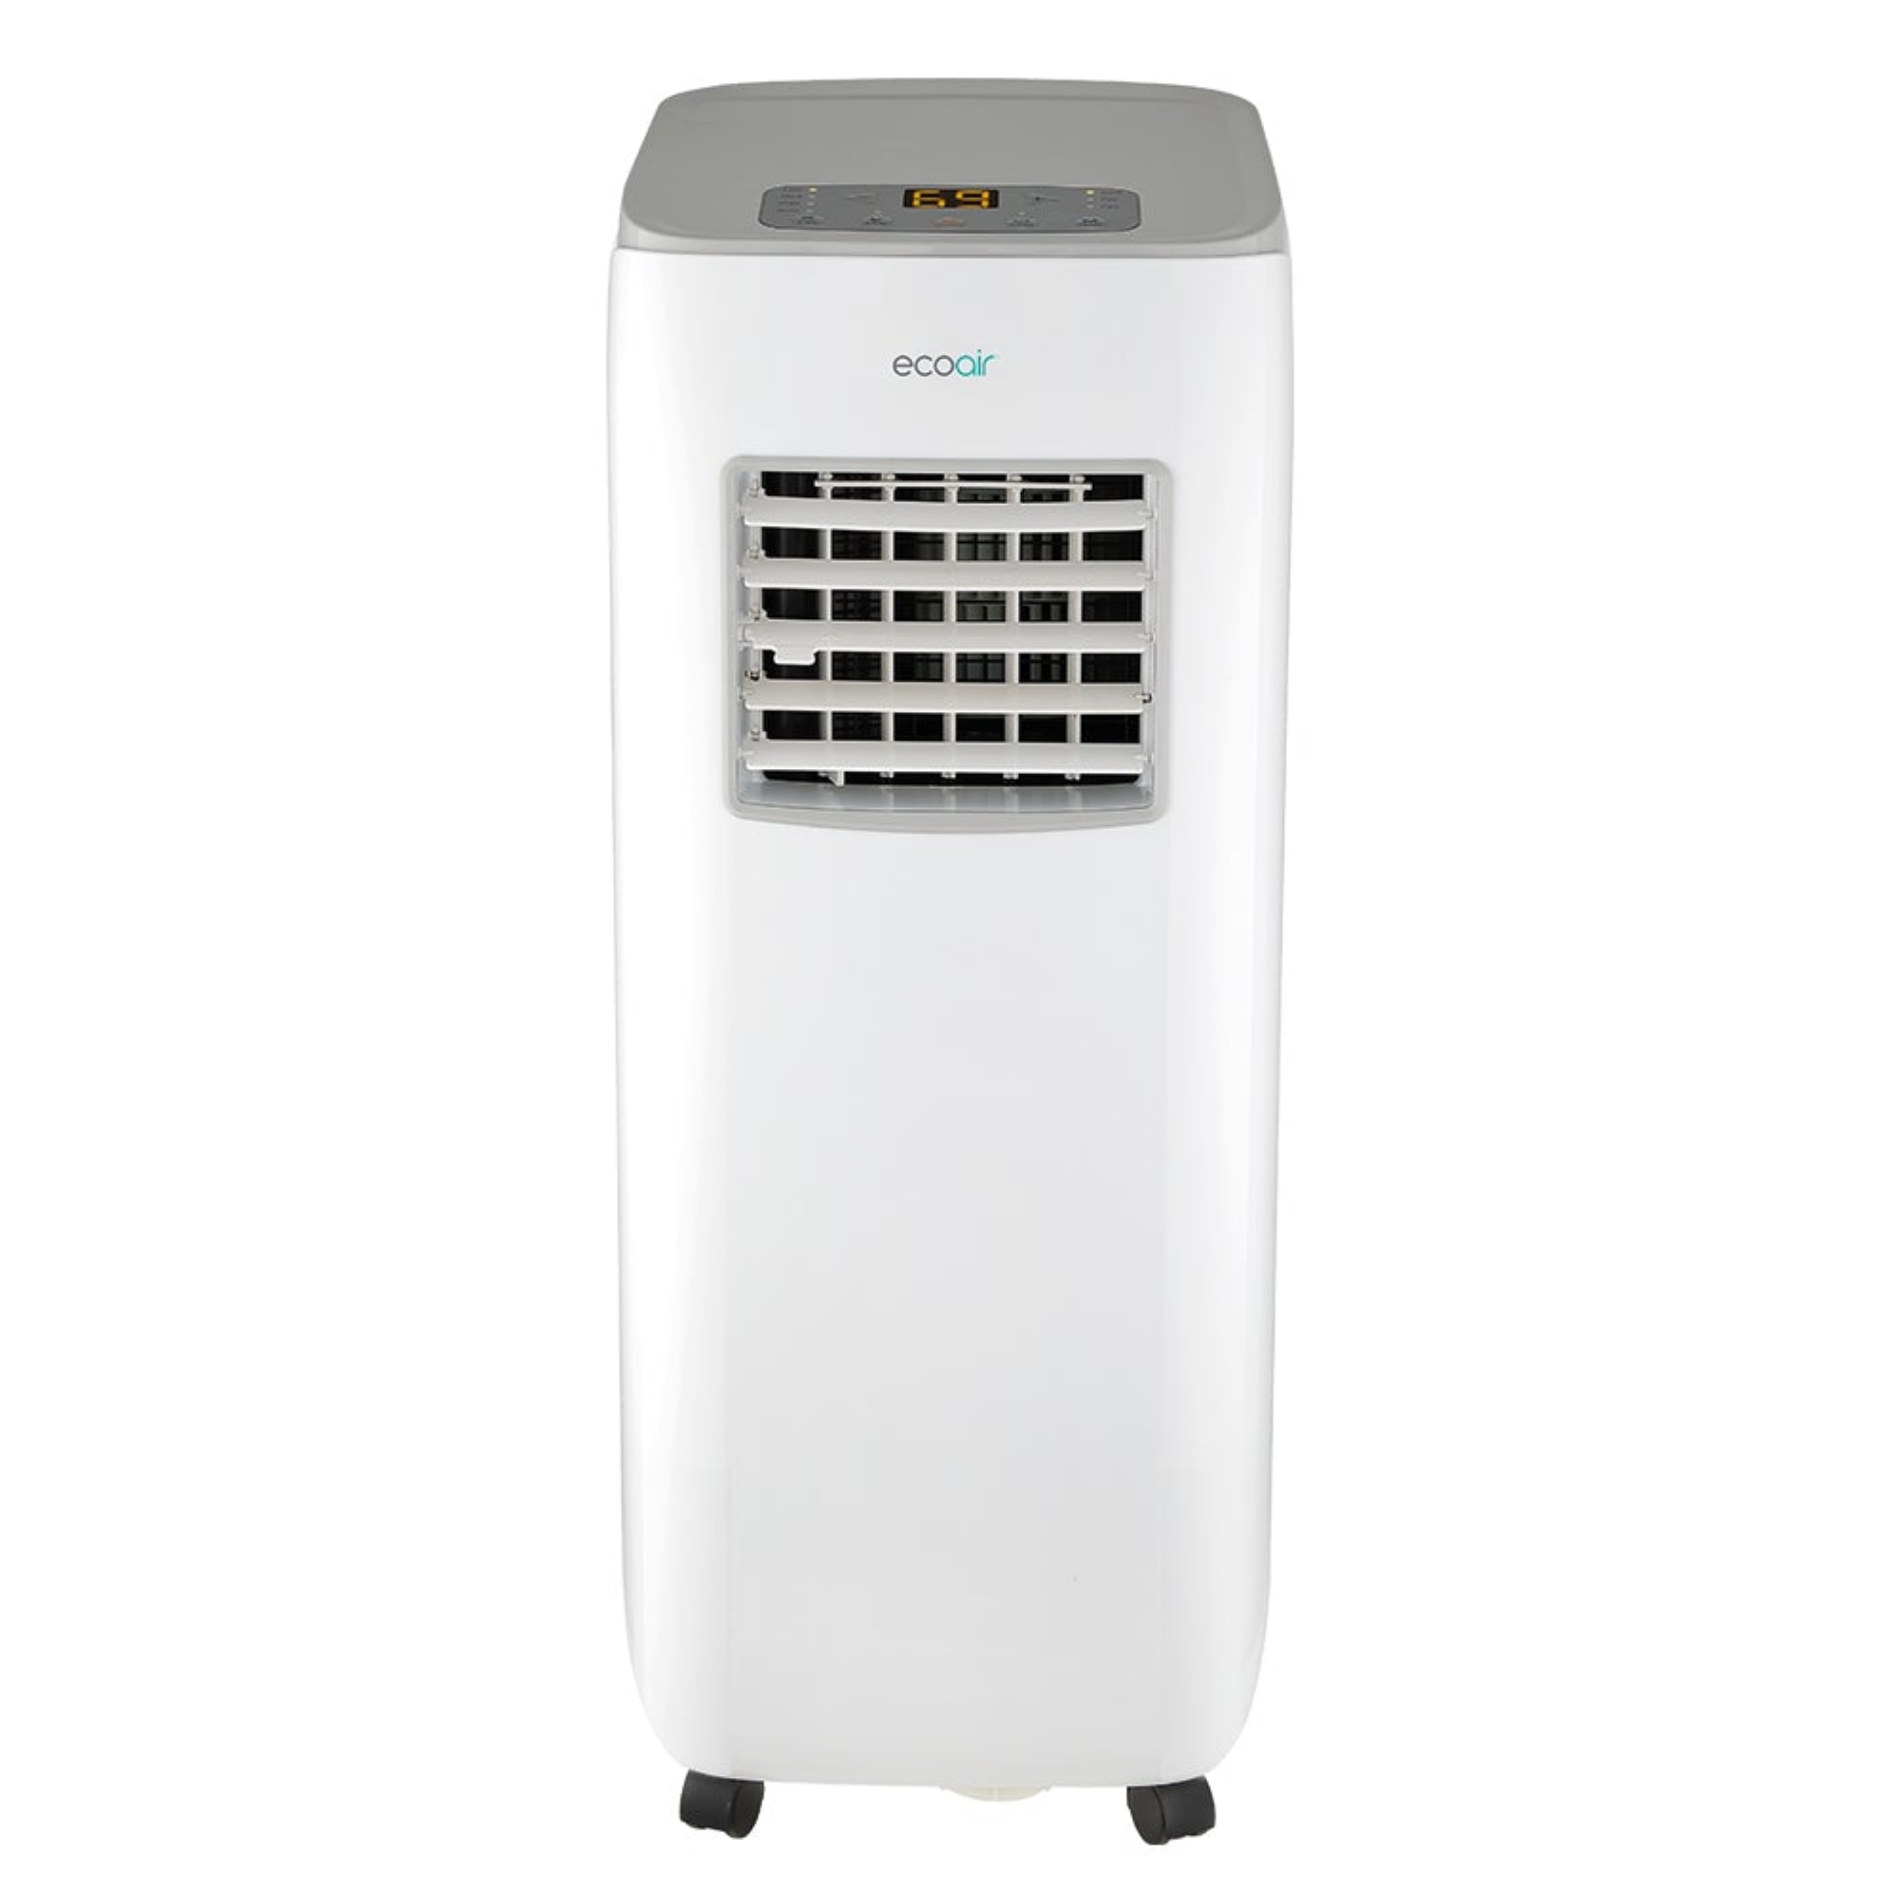 Eco Air Crystal R32 2.8kW Portable Air Conditioning Unit | Sunbelt Sales